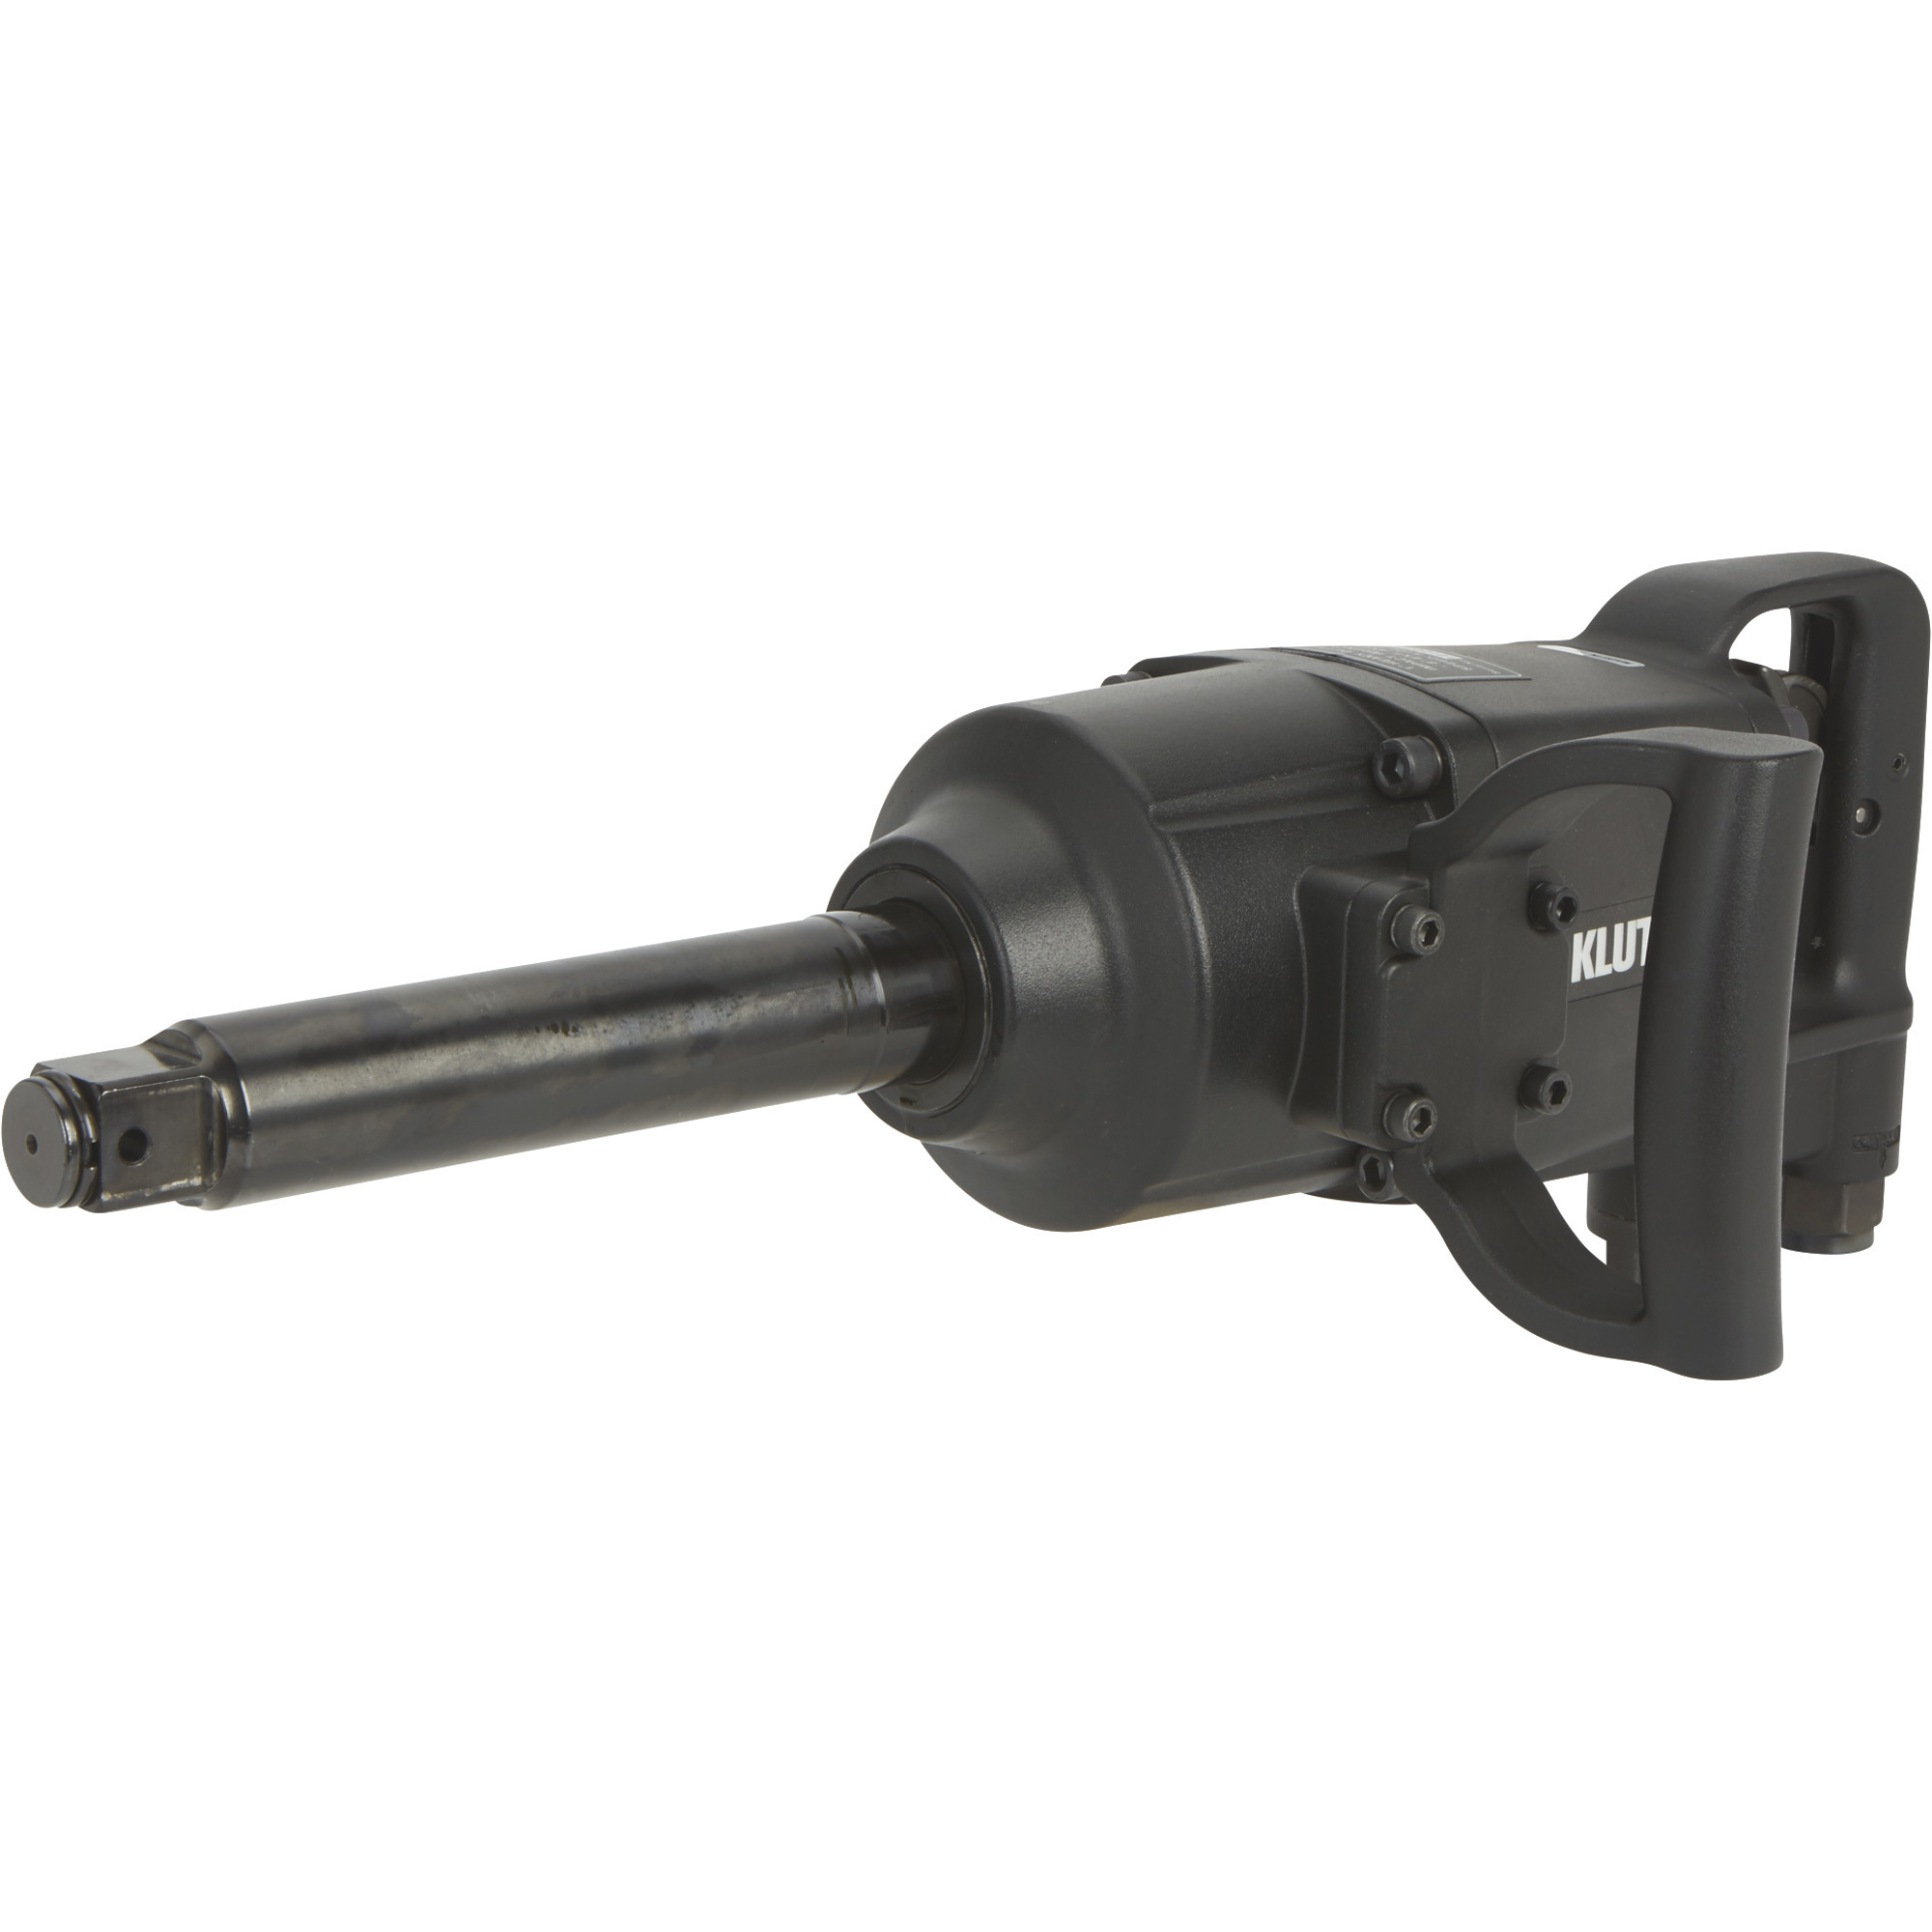 Klutch Heavy-Duty Air Impact Wrench with 8Inch Anvil and D-Handle, 1Inch Drive, 10 CFM, 2500 Ft./Lbs. Torque